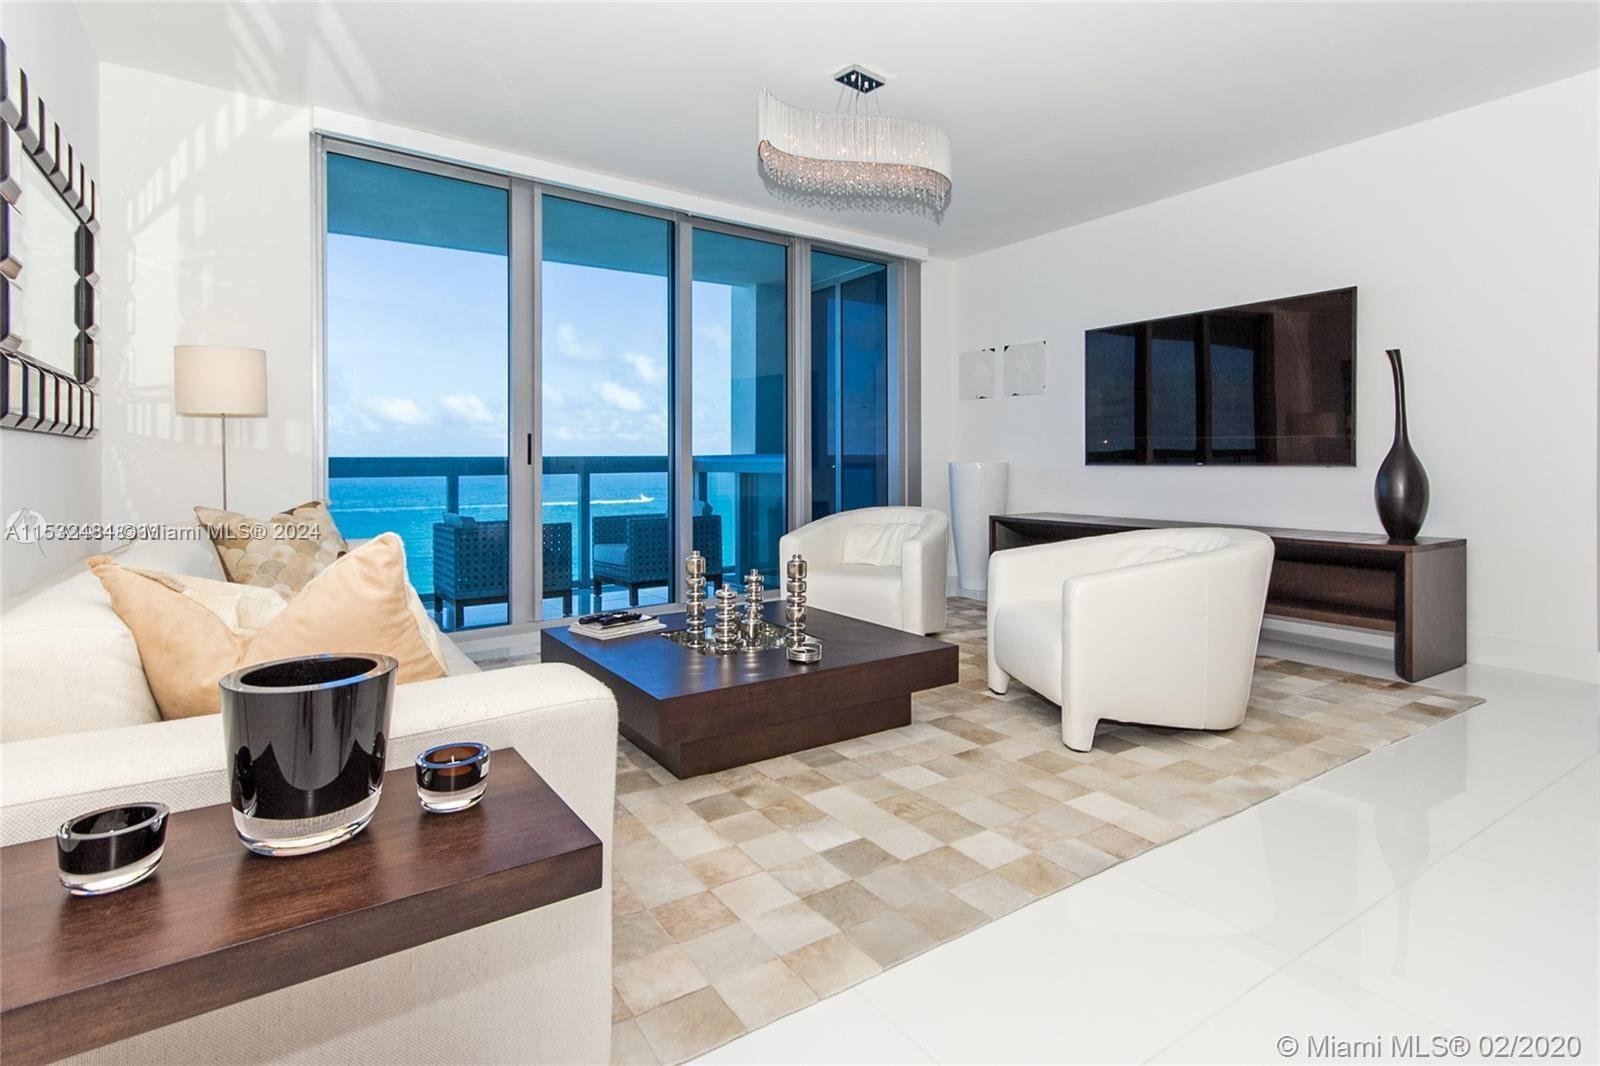 DIRECT OCEAN view split plan elegantly decorated by Saccaro in prestigious North Tower, Carillon Miami Wellness Resort, a premier oceanfront property.  Every detail for your comfort & luxury, including motorized shades; white glass floors; crystal chandeliers; pebble stone flooring in shower; Samsung 2023 85” 4K Smart Tizen TV in living room; Samsung 55” TV’s in bedrooms; water filtration system; fully equipped kitchen; outdoor table seating for 6. Classes offered 7 days week; full use of 70,000 sqft fitness center & amenities (including thermal Hydrotherapy Circuit) ALL included in rent.  Salon; 4 pools; concierge; restaurant; pool, beach service; bar; 24-hour security; valet; wellness staff. Walking neighborhood with all conveniences. ONLY OFFERED 6 MOS OFF SEASON.  NO PETS.